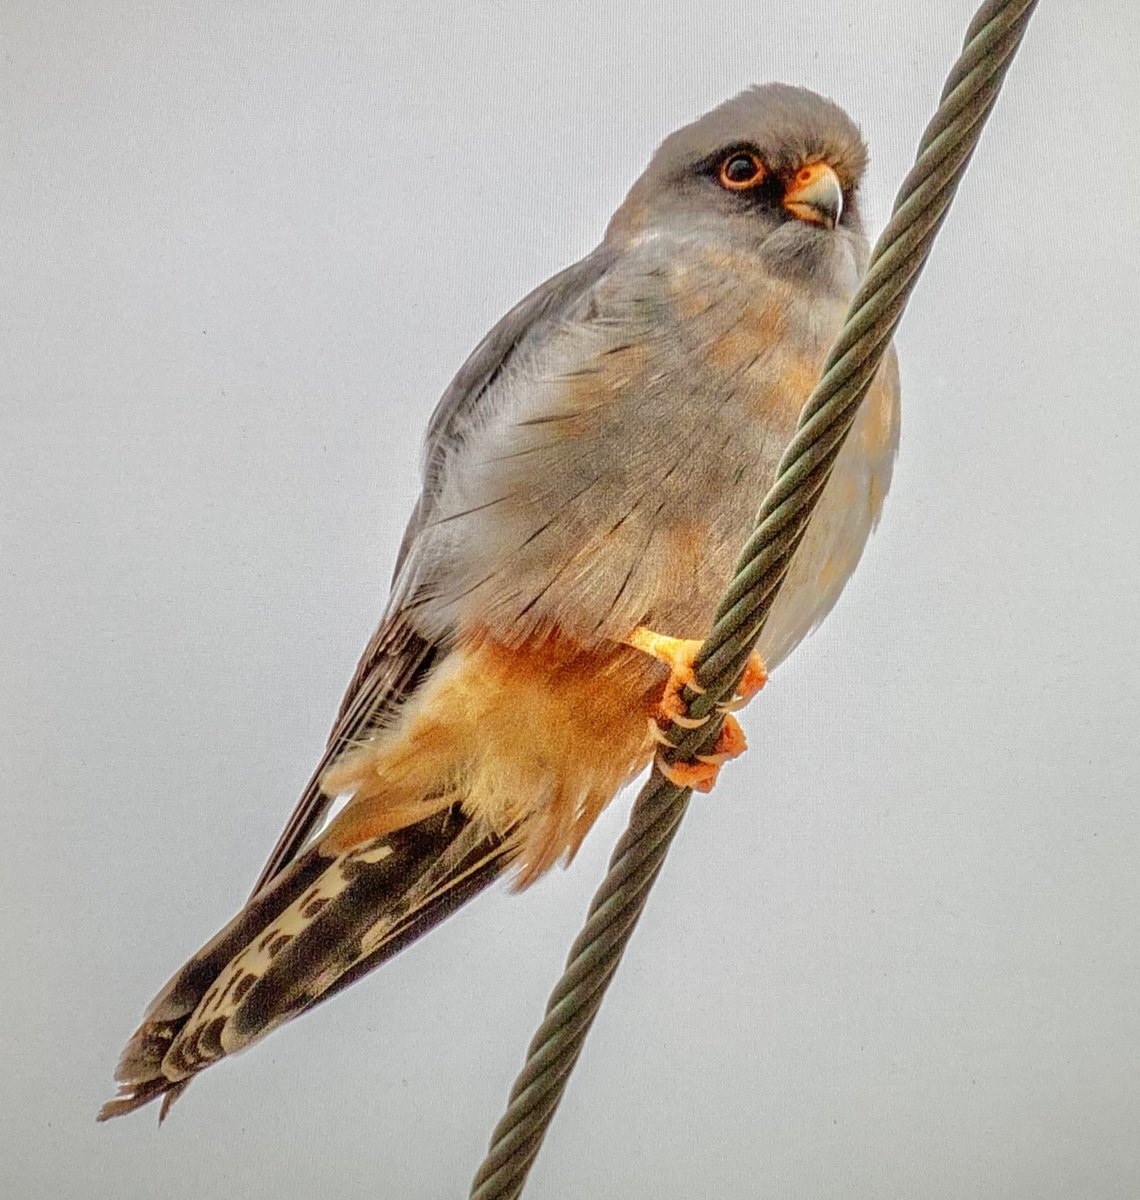 Red-footed Falcon, Anarita, Cyprus, the only one I saw all week. Have to admit it brought back fond memories of a very similar bird which I found at Kelham Bridge, Leicestershire, some 26 years ago, still a highlight of my UK birding career! #BirdsSeenIn2023 #cyprusbirds